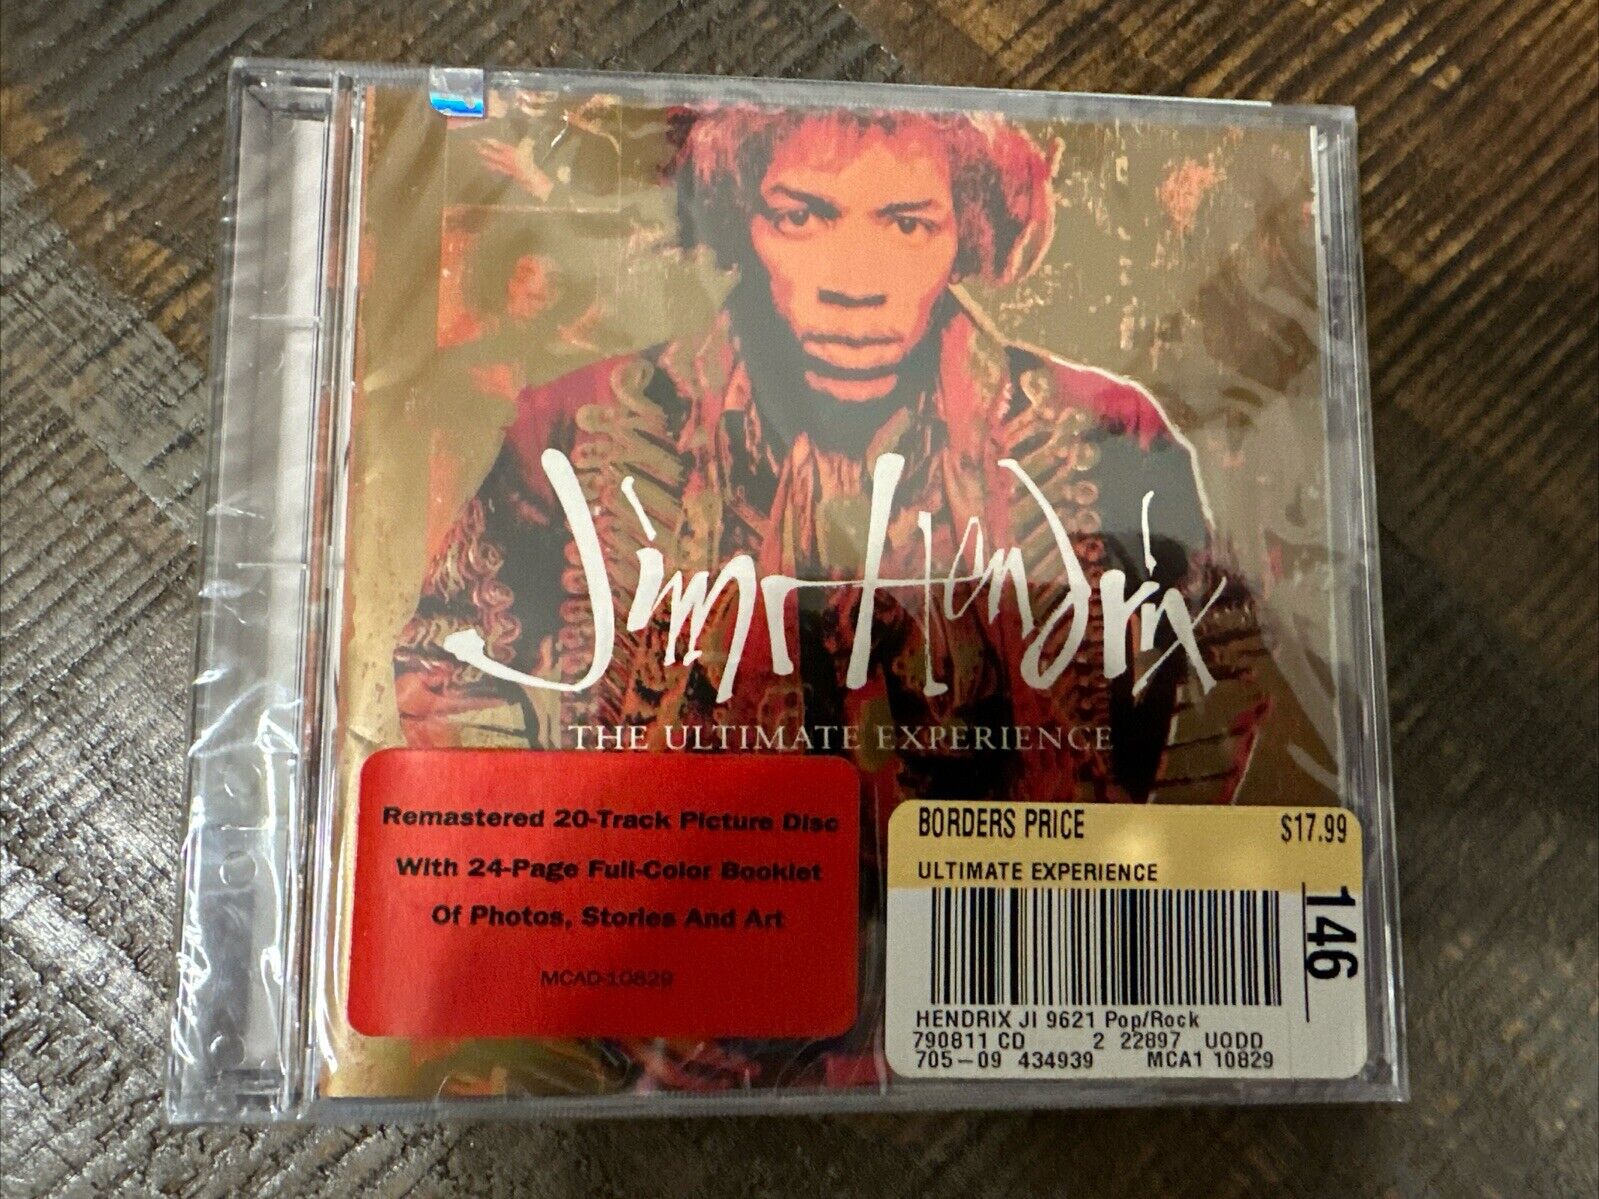 The Ultimate Experience by Jimi Hendrix (CD, Apr-1993, MCA) USA - Sealed